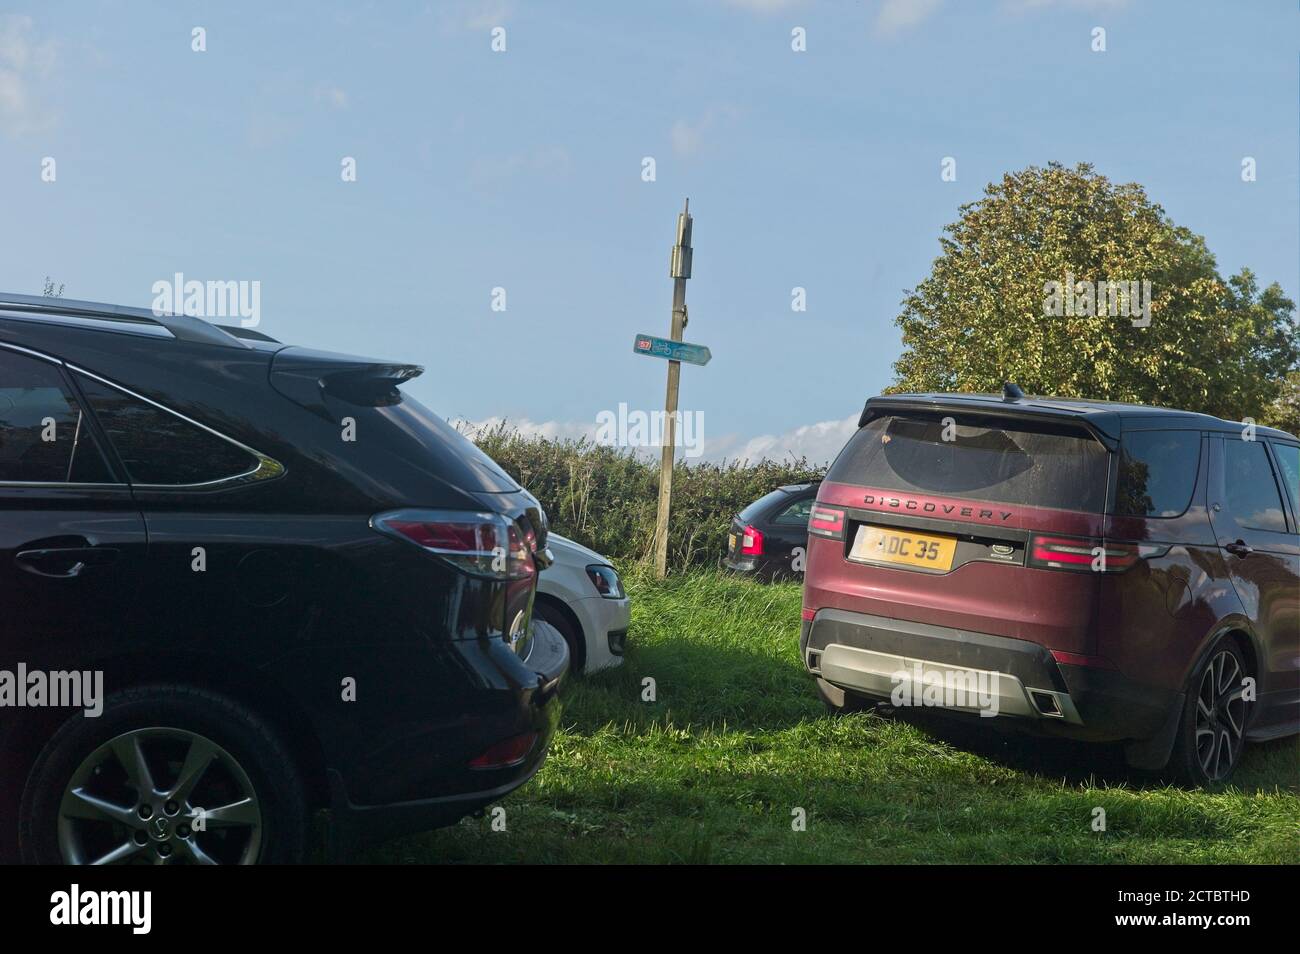 Parked cars in a rural setting. Stock Photo